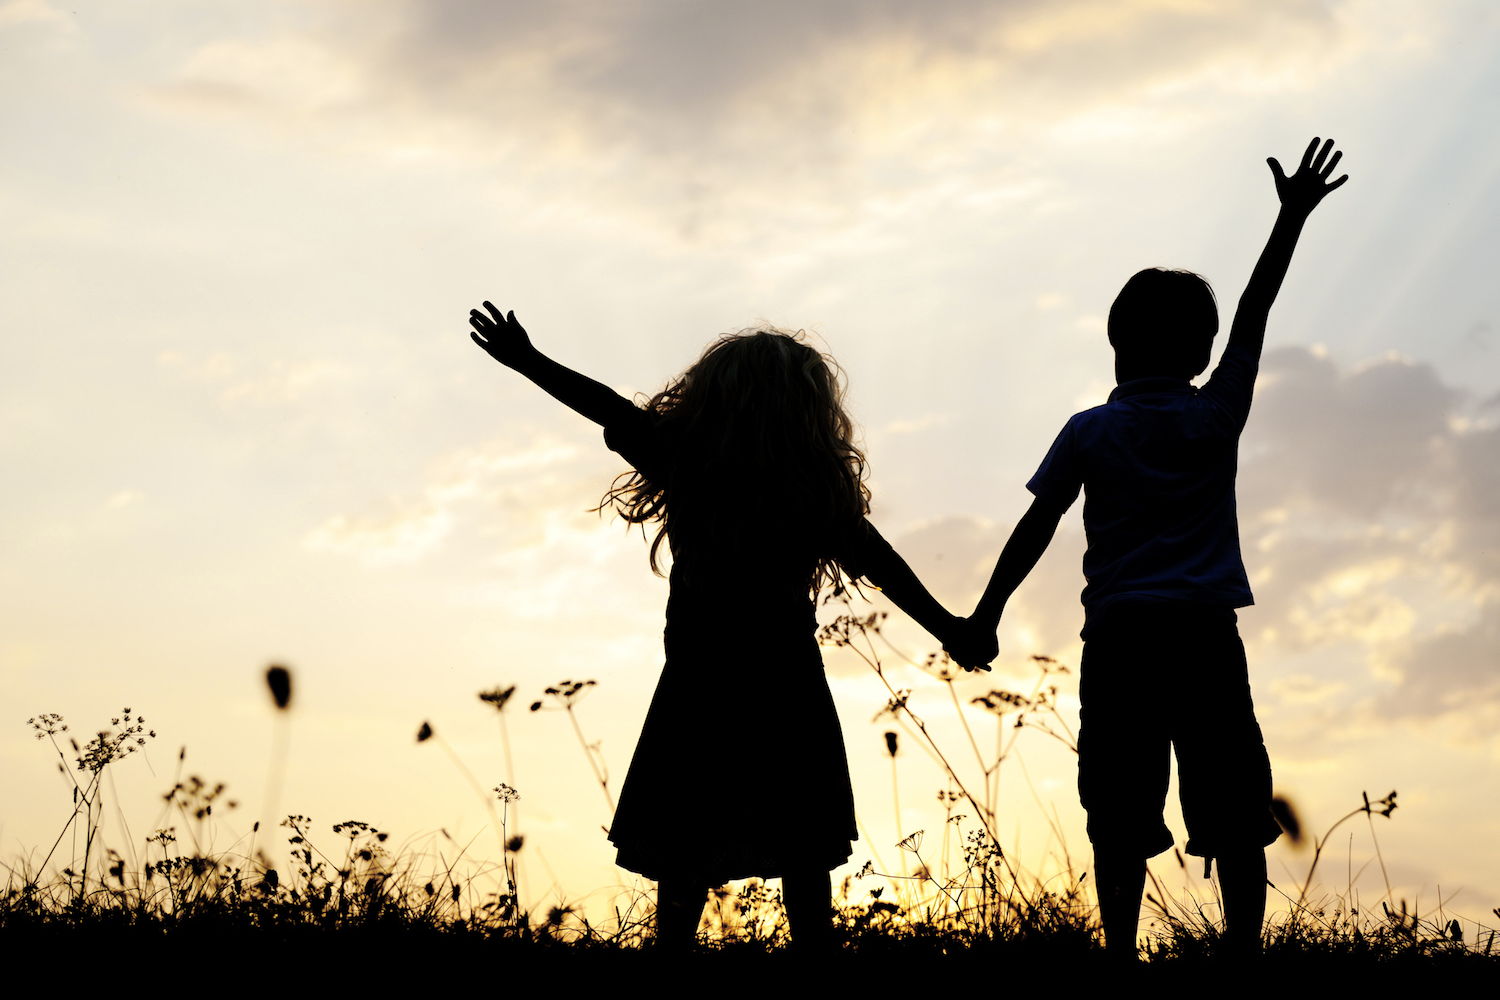 Two children silhouetted in front of a blue sky holding hands in a field of flowers.